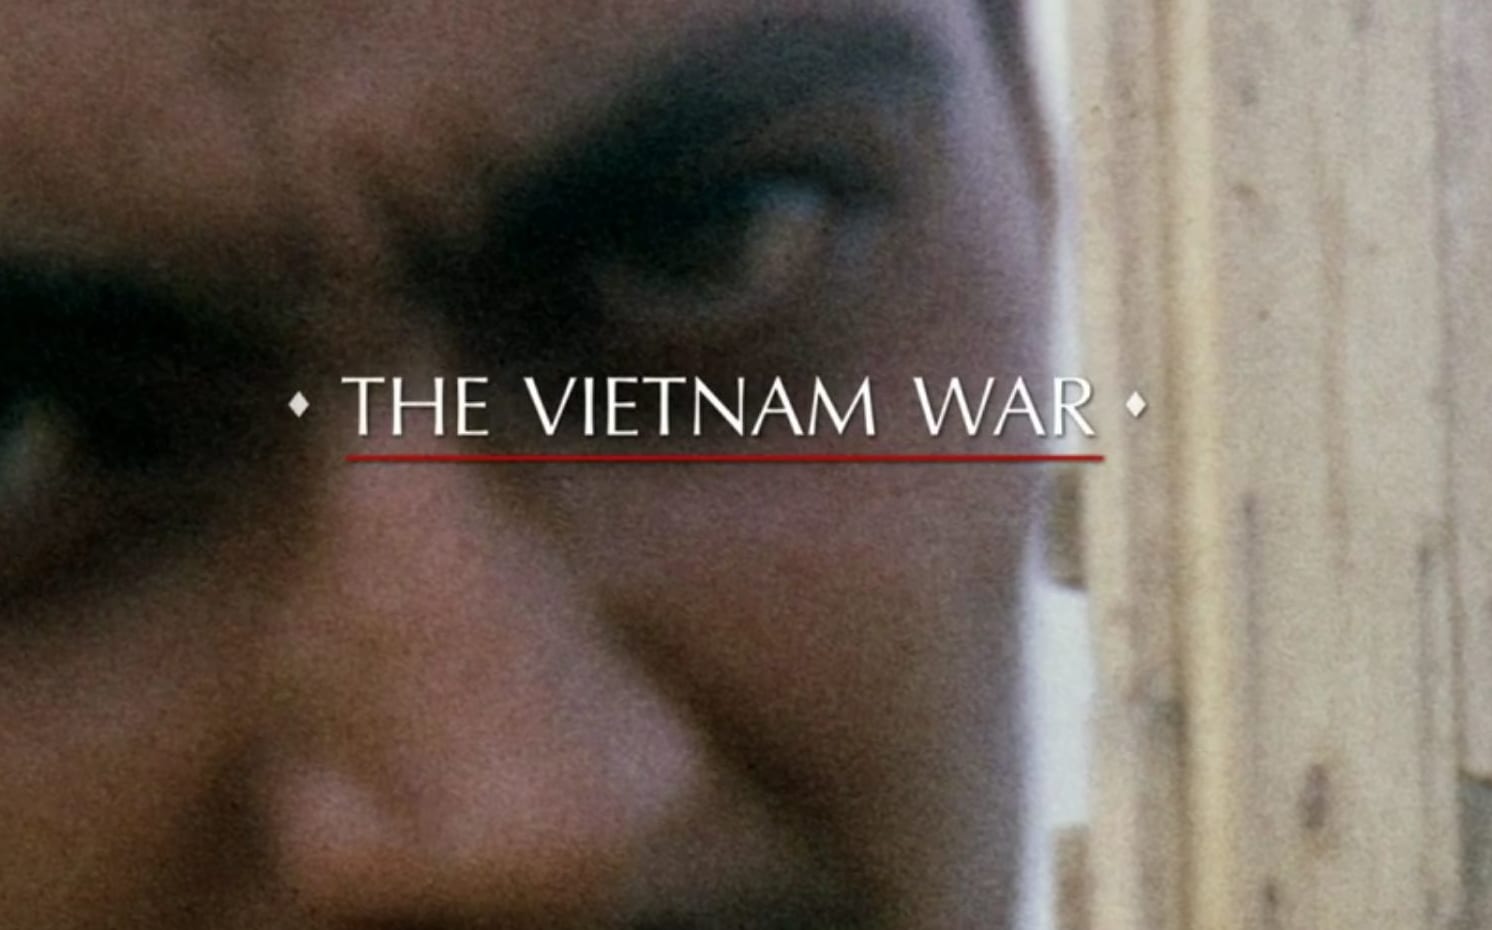 'The Vietnam War' by Ken Burns - available on demand in New Zealand but not on air.